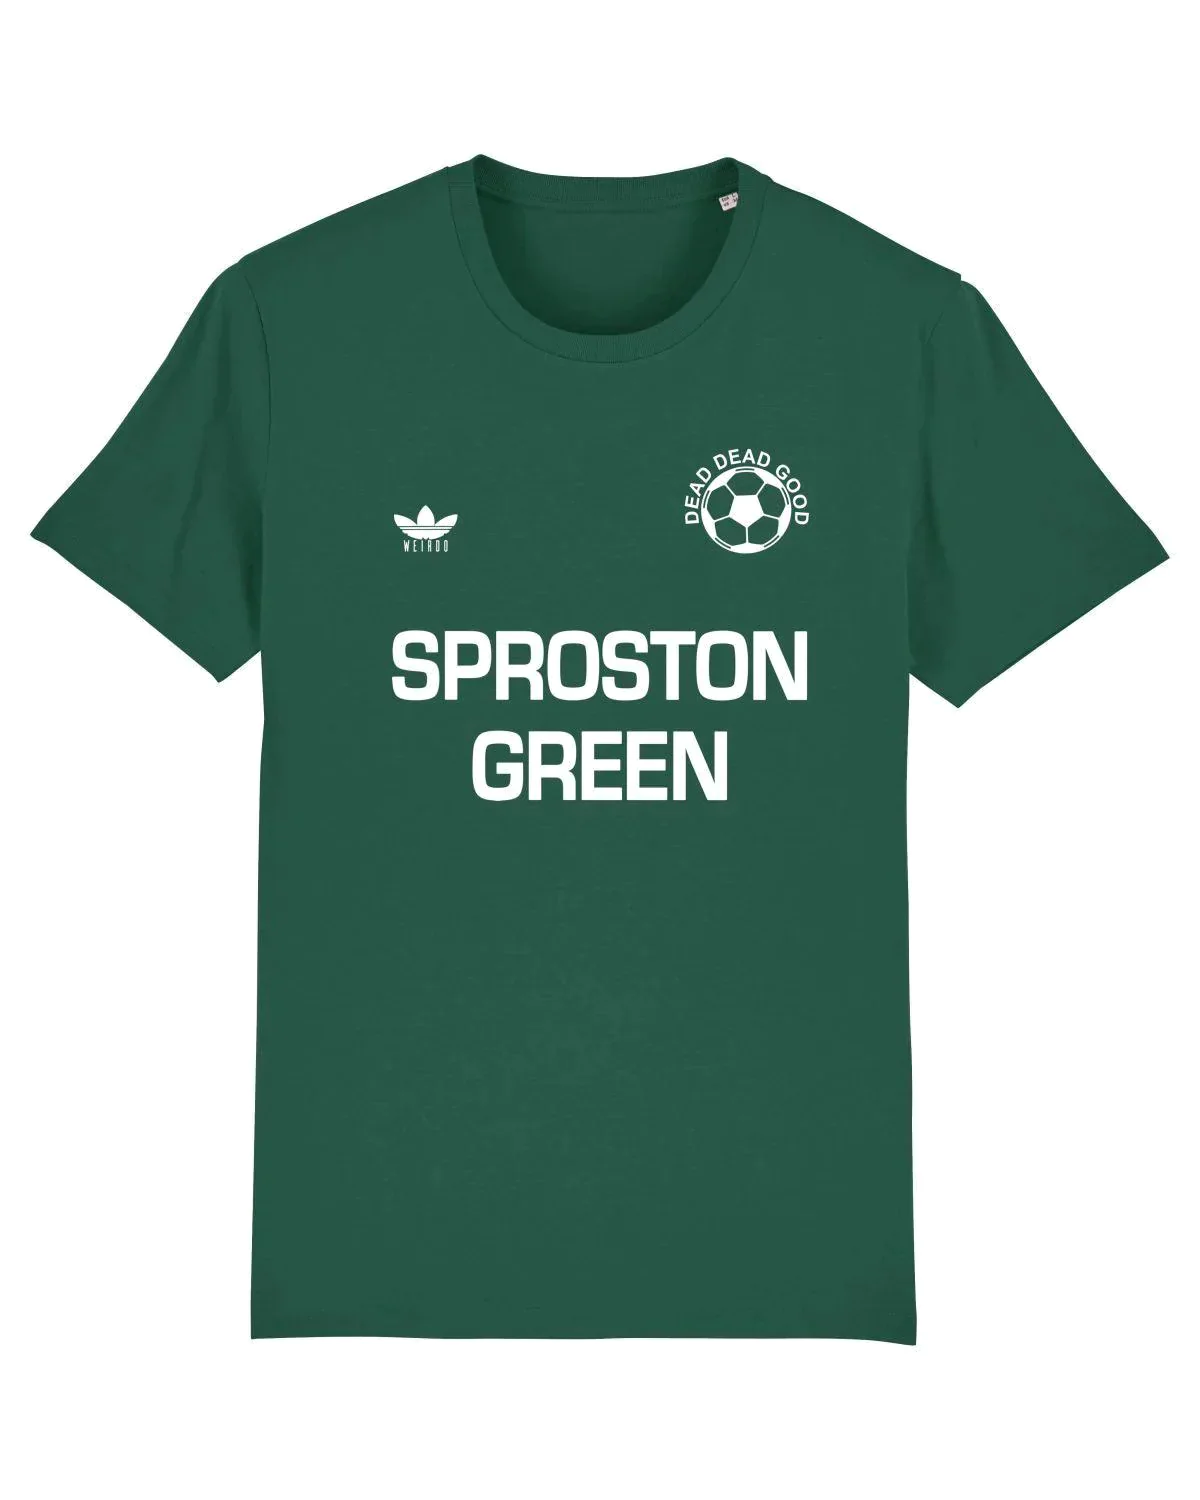 SPROSTON GREEN: T-Shirt Inspired by The Charlatans & Football (2 Shades of Green Available)